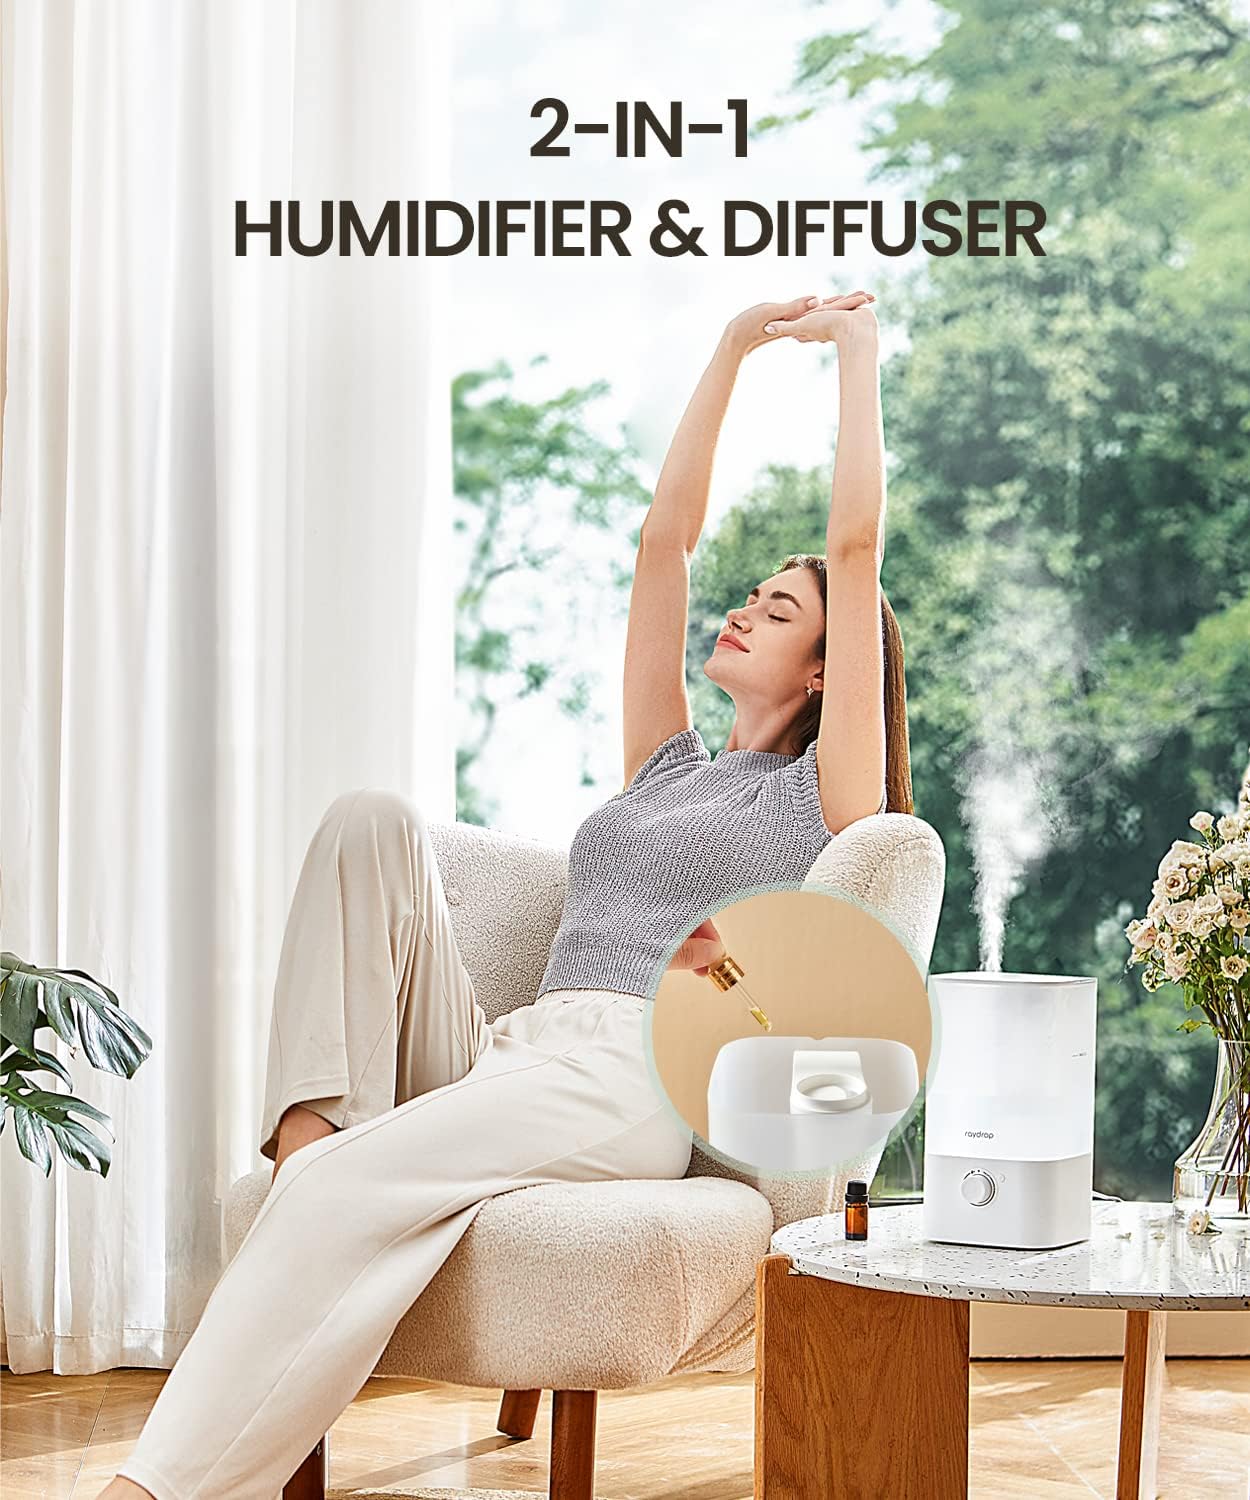 raydrop Humidifiers for Bedroom, 2.5L Top Fill Cool Mist Humidifiers for Home, Large Room, Baby, and Plant, Essential Oil Diffuser with Cycling 7 Color Lights, 360° Nozzle, Auto Shut-Off, White